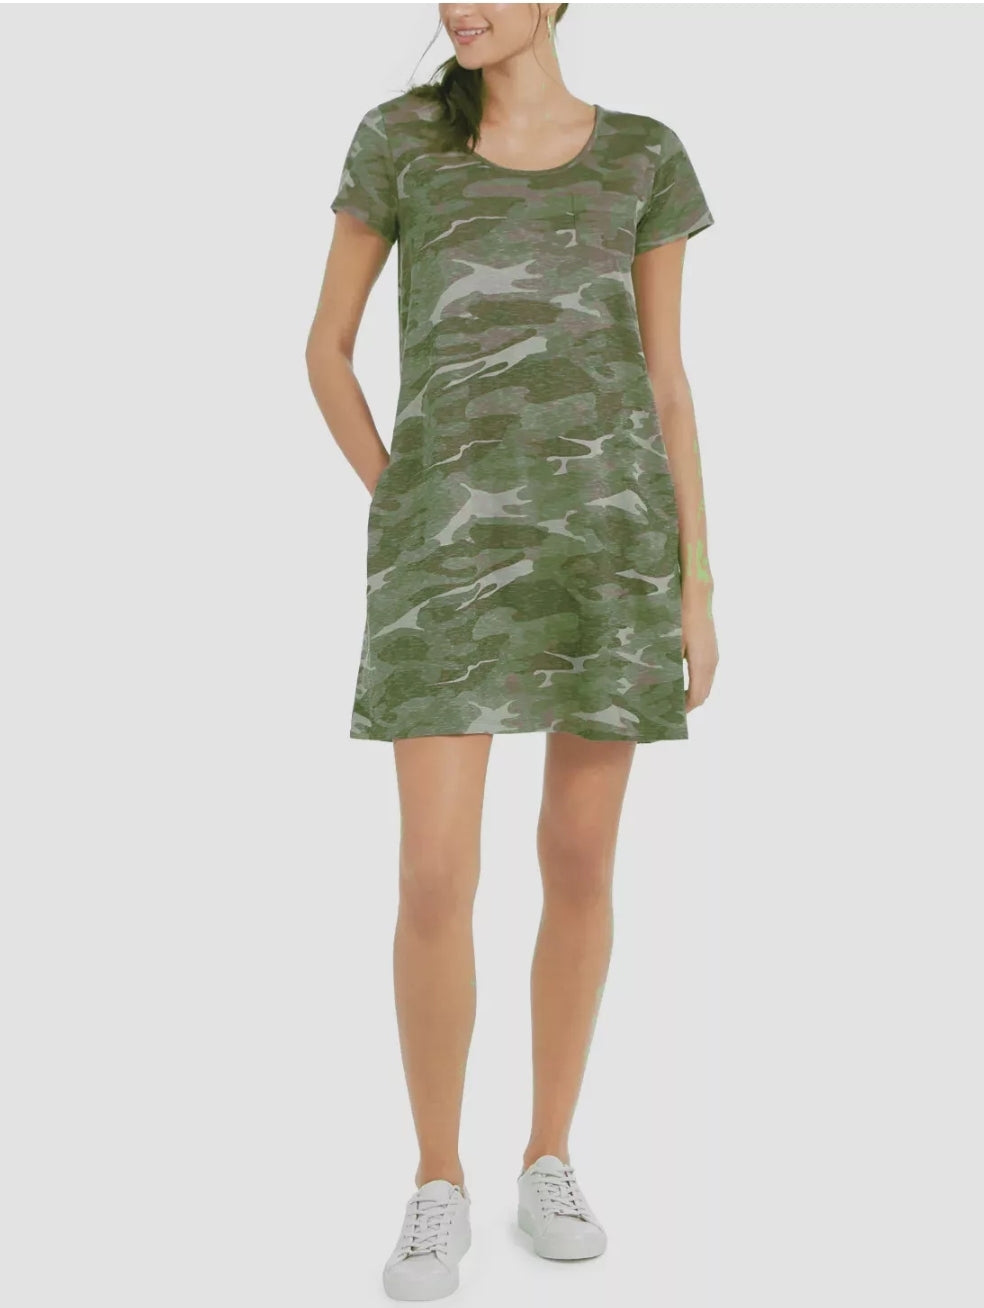 Get a laid-back look with Style & Co's casual-cool cotton T-shirt dress styled in a fun camo print. XL XL by Brands Overstock | Brands Overstock